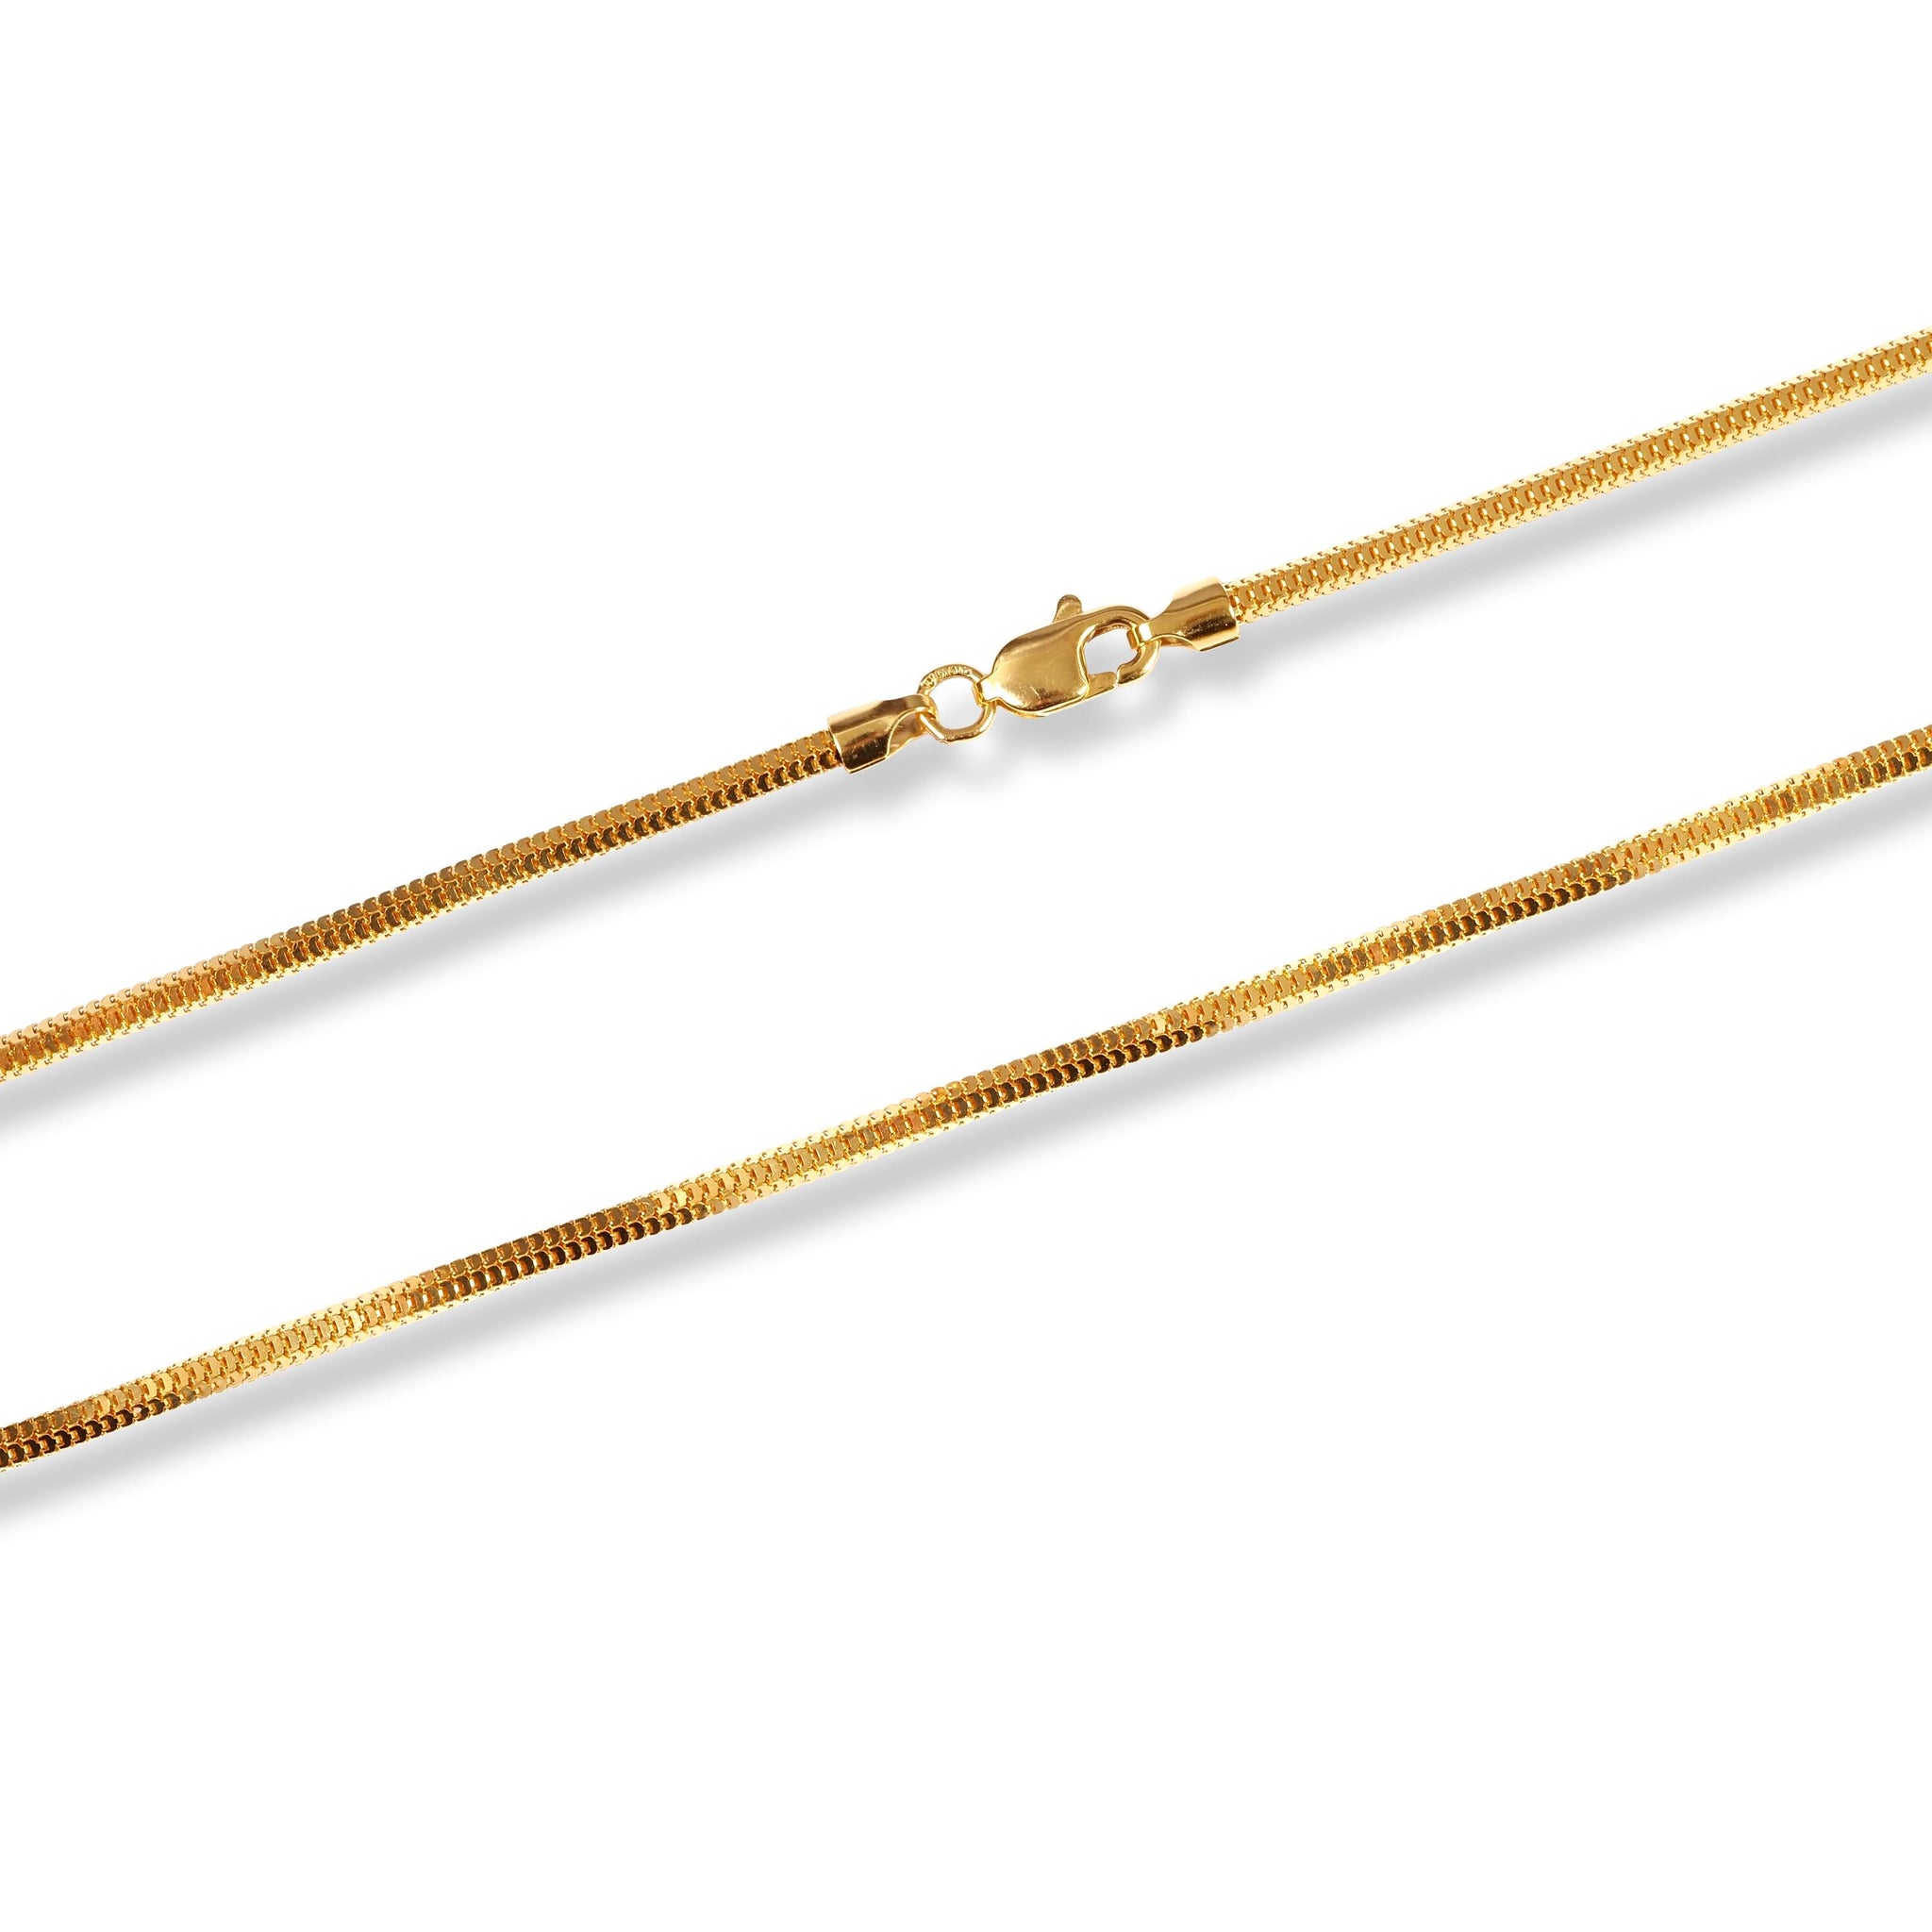 22ct Yellow Gold Round Snake Chain with Lobster Clasp C-1217